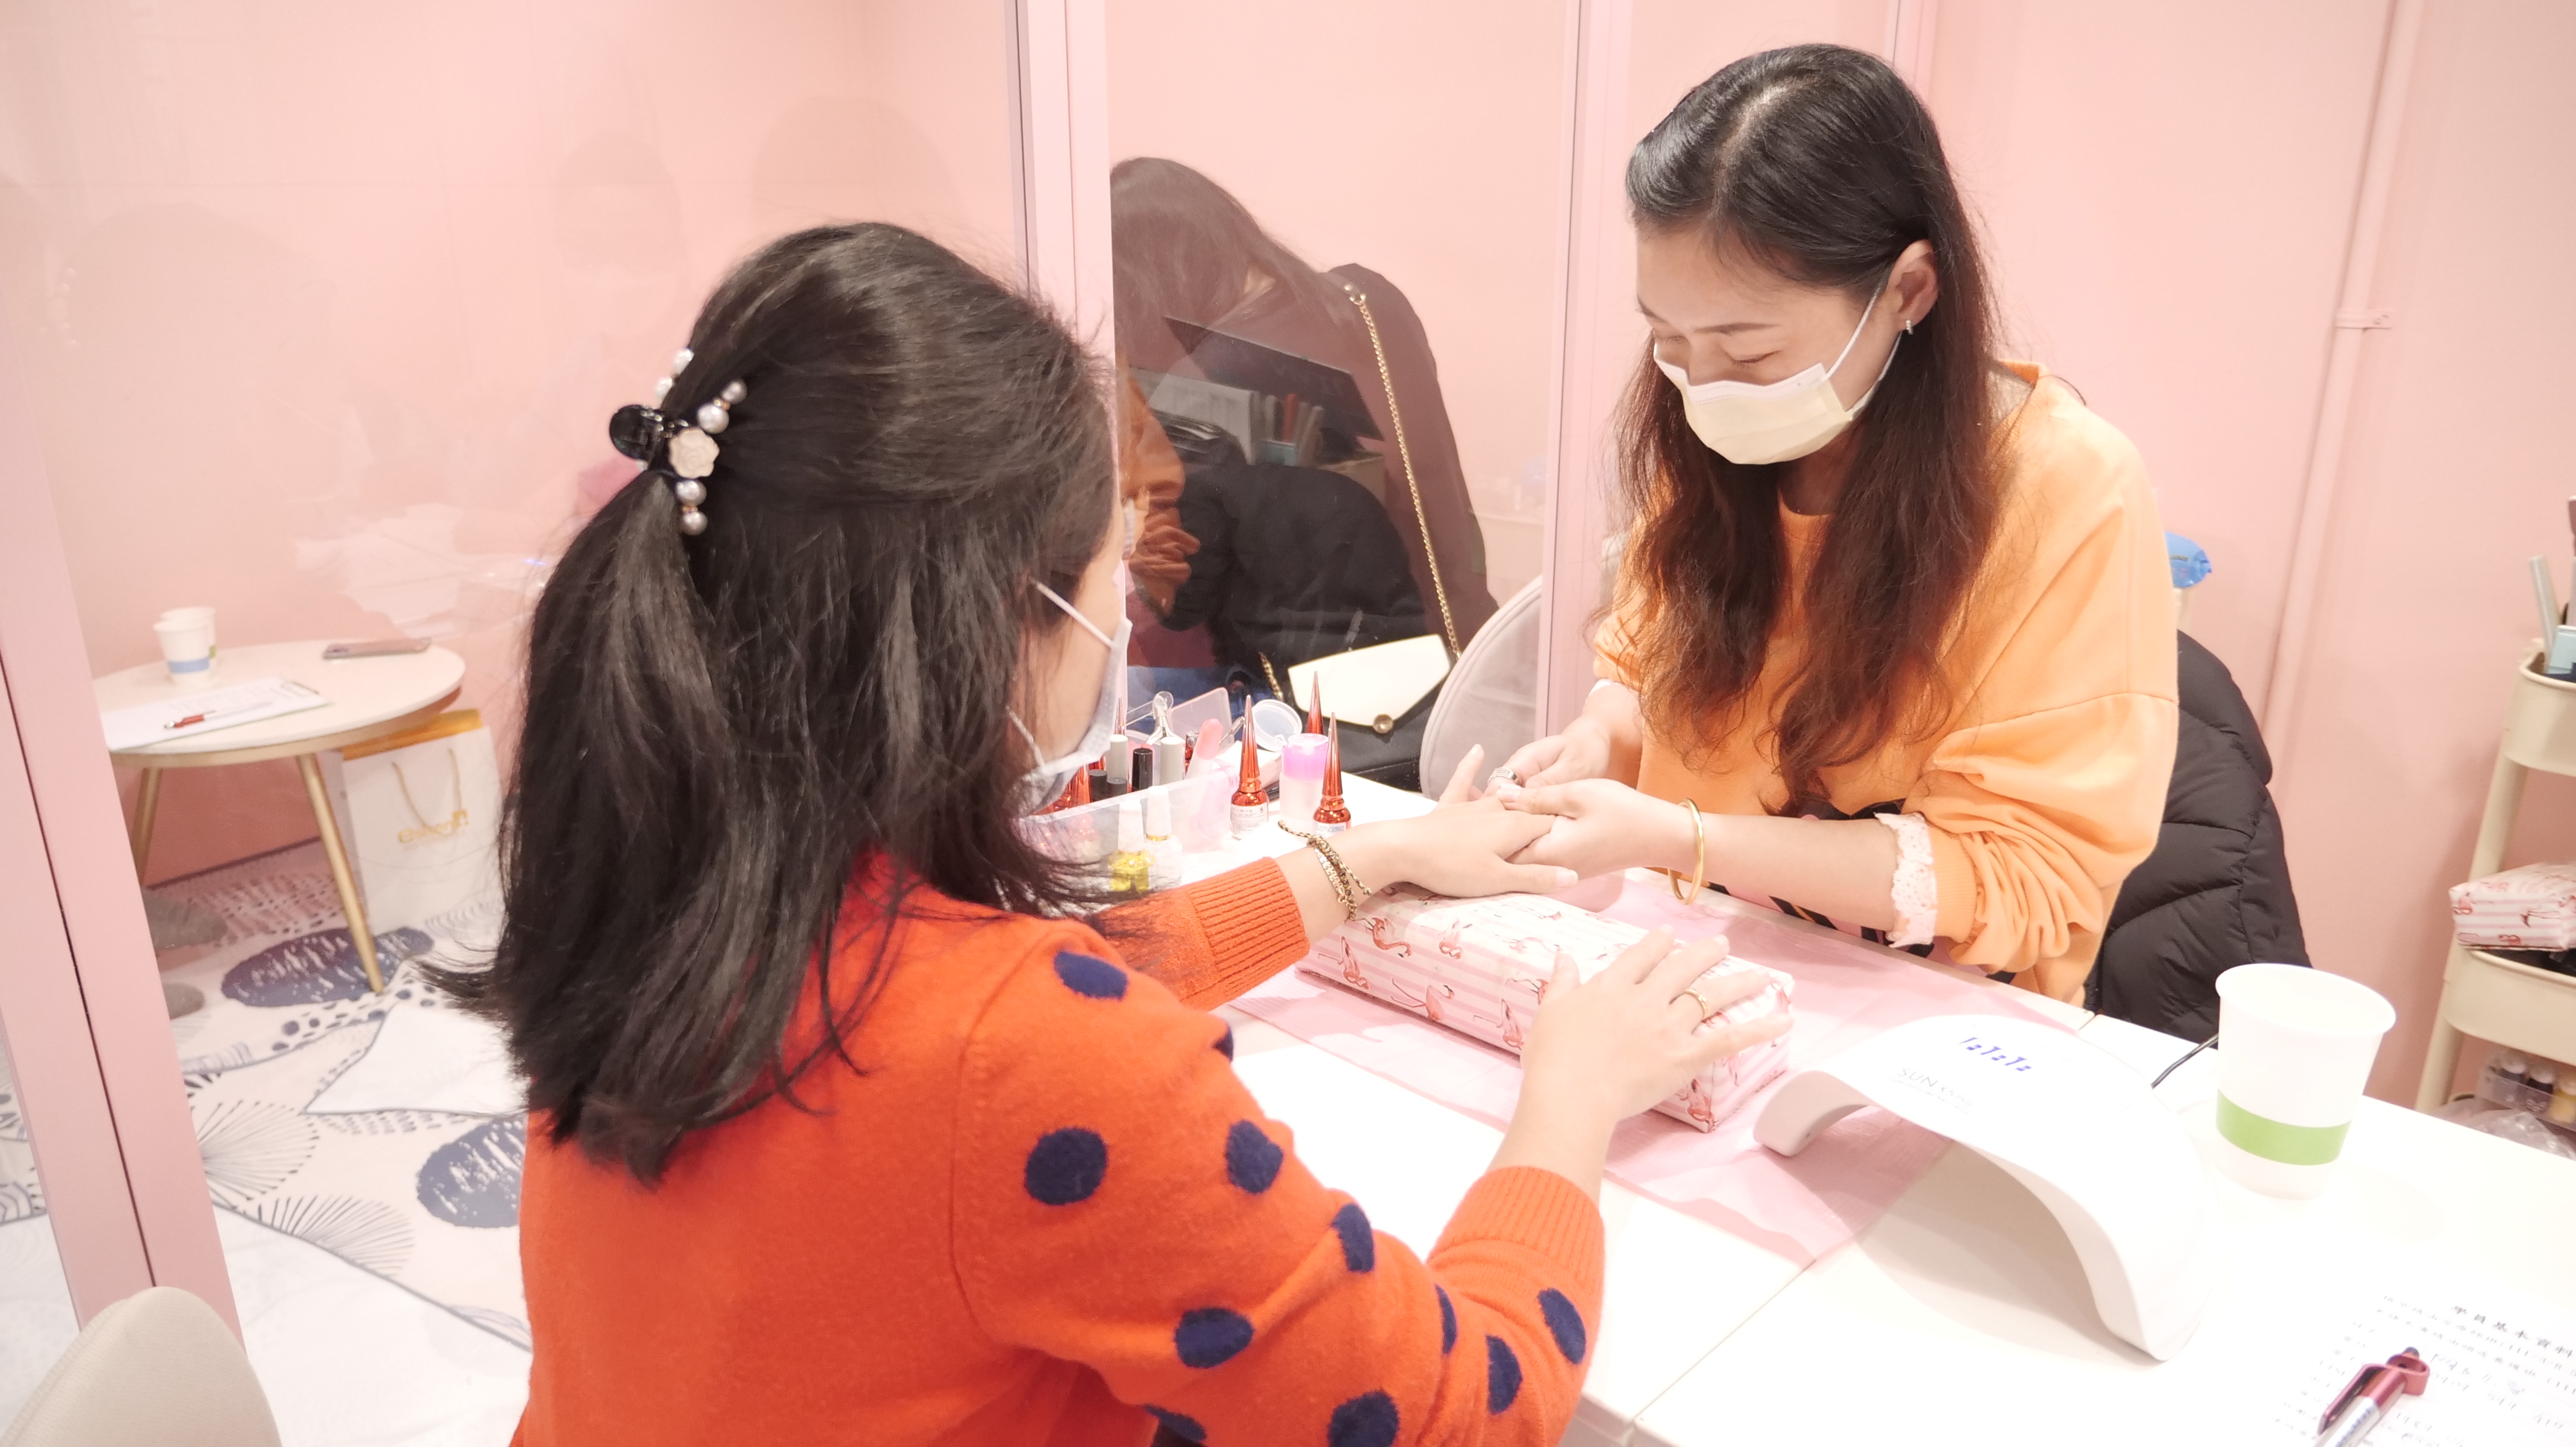 Activities include “nail beauty” & “eyelash extension”. (Photo / Provided by張睿弘)